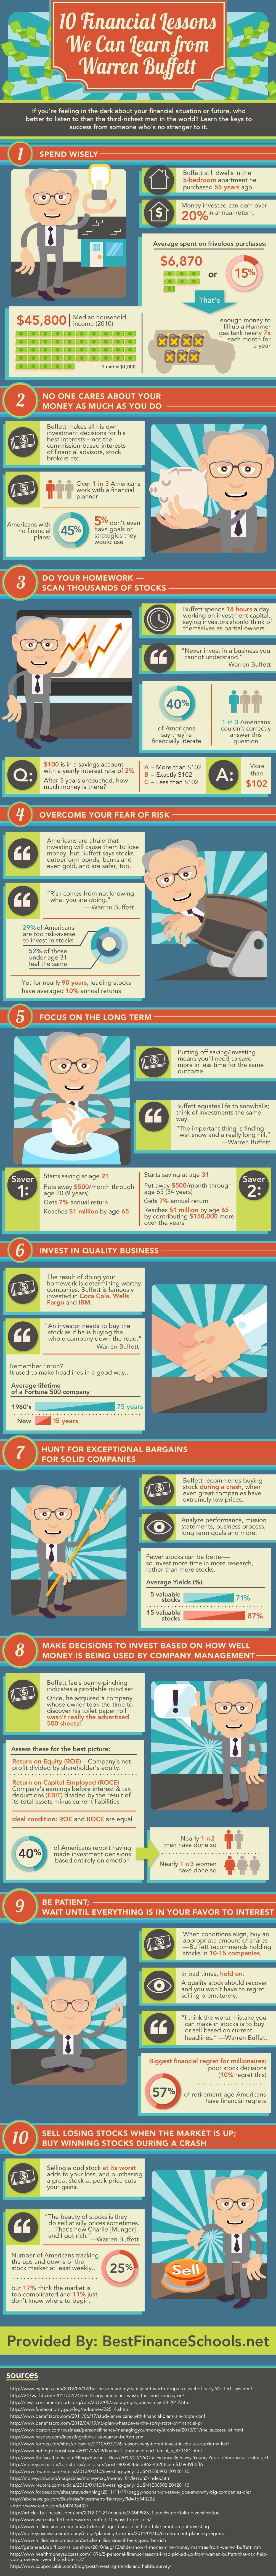 Infographic – “10 Financial Lessons We Can Learn from Warren Buffet” – via Business Insider